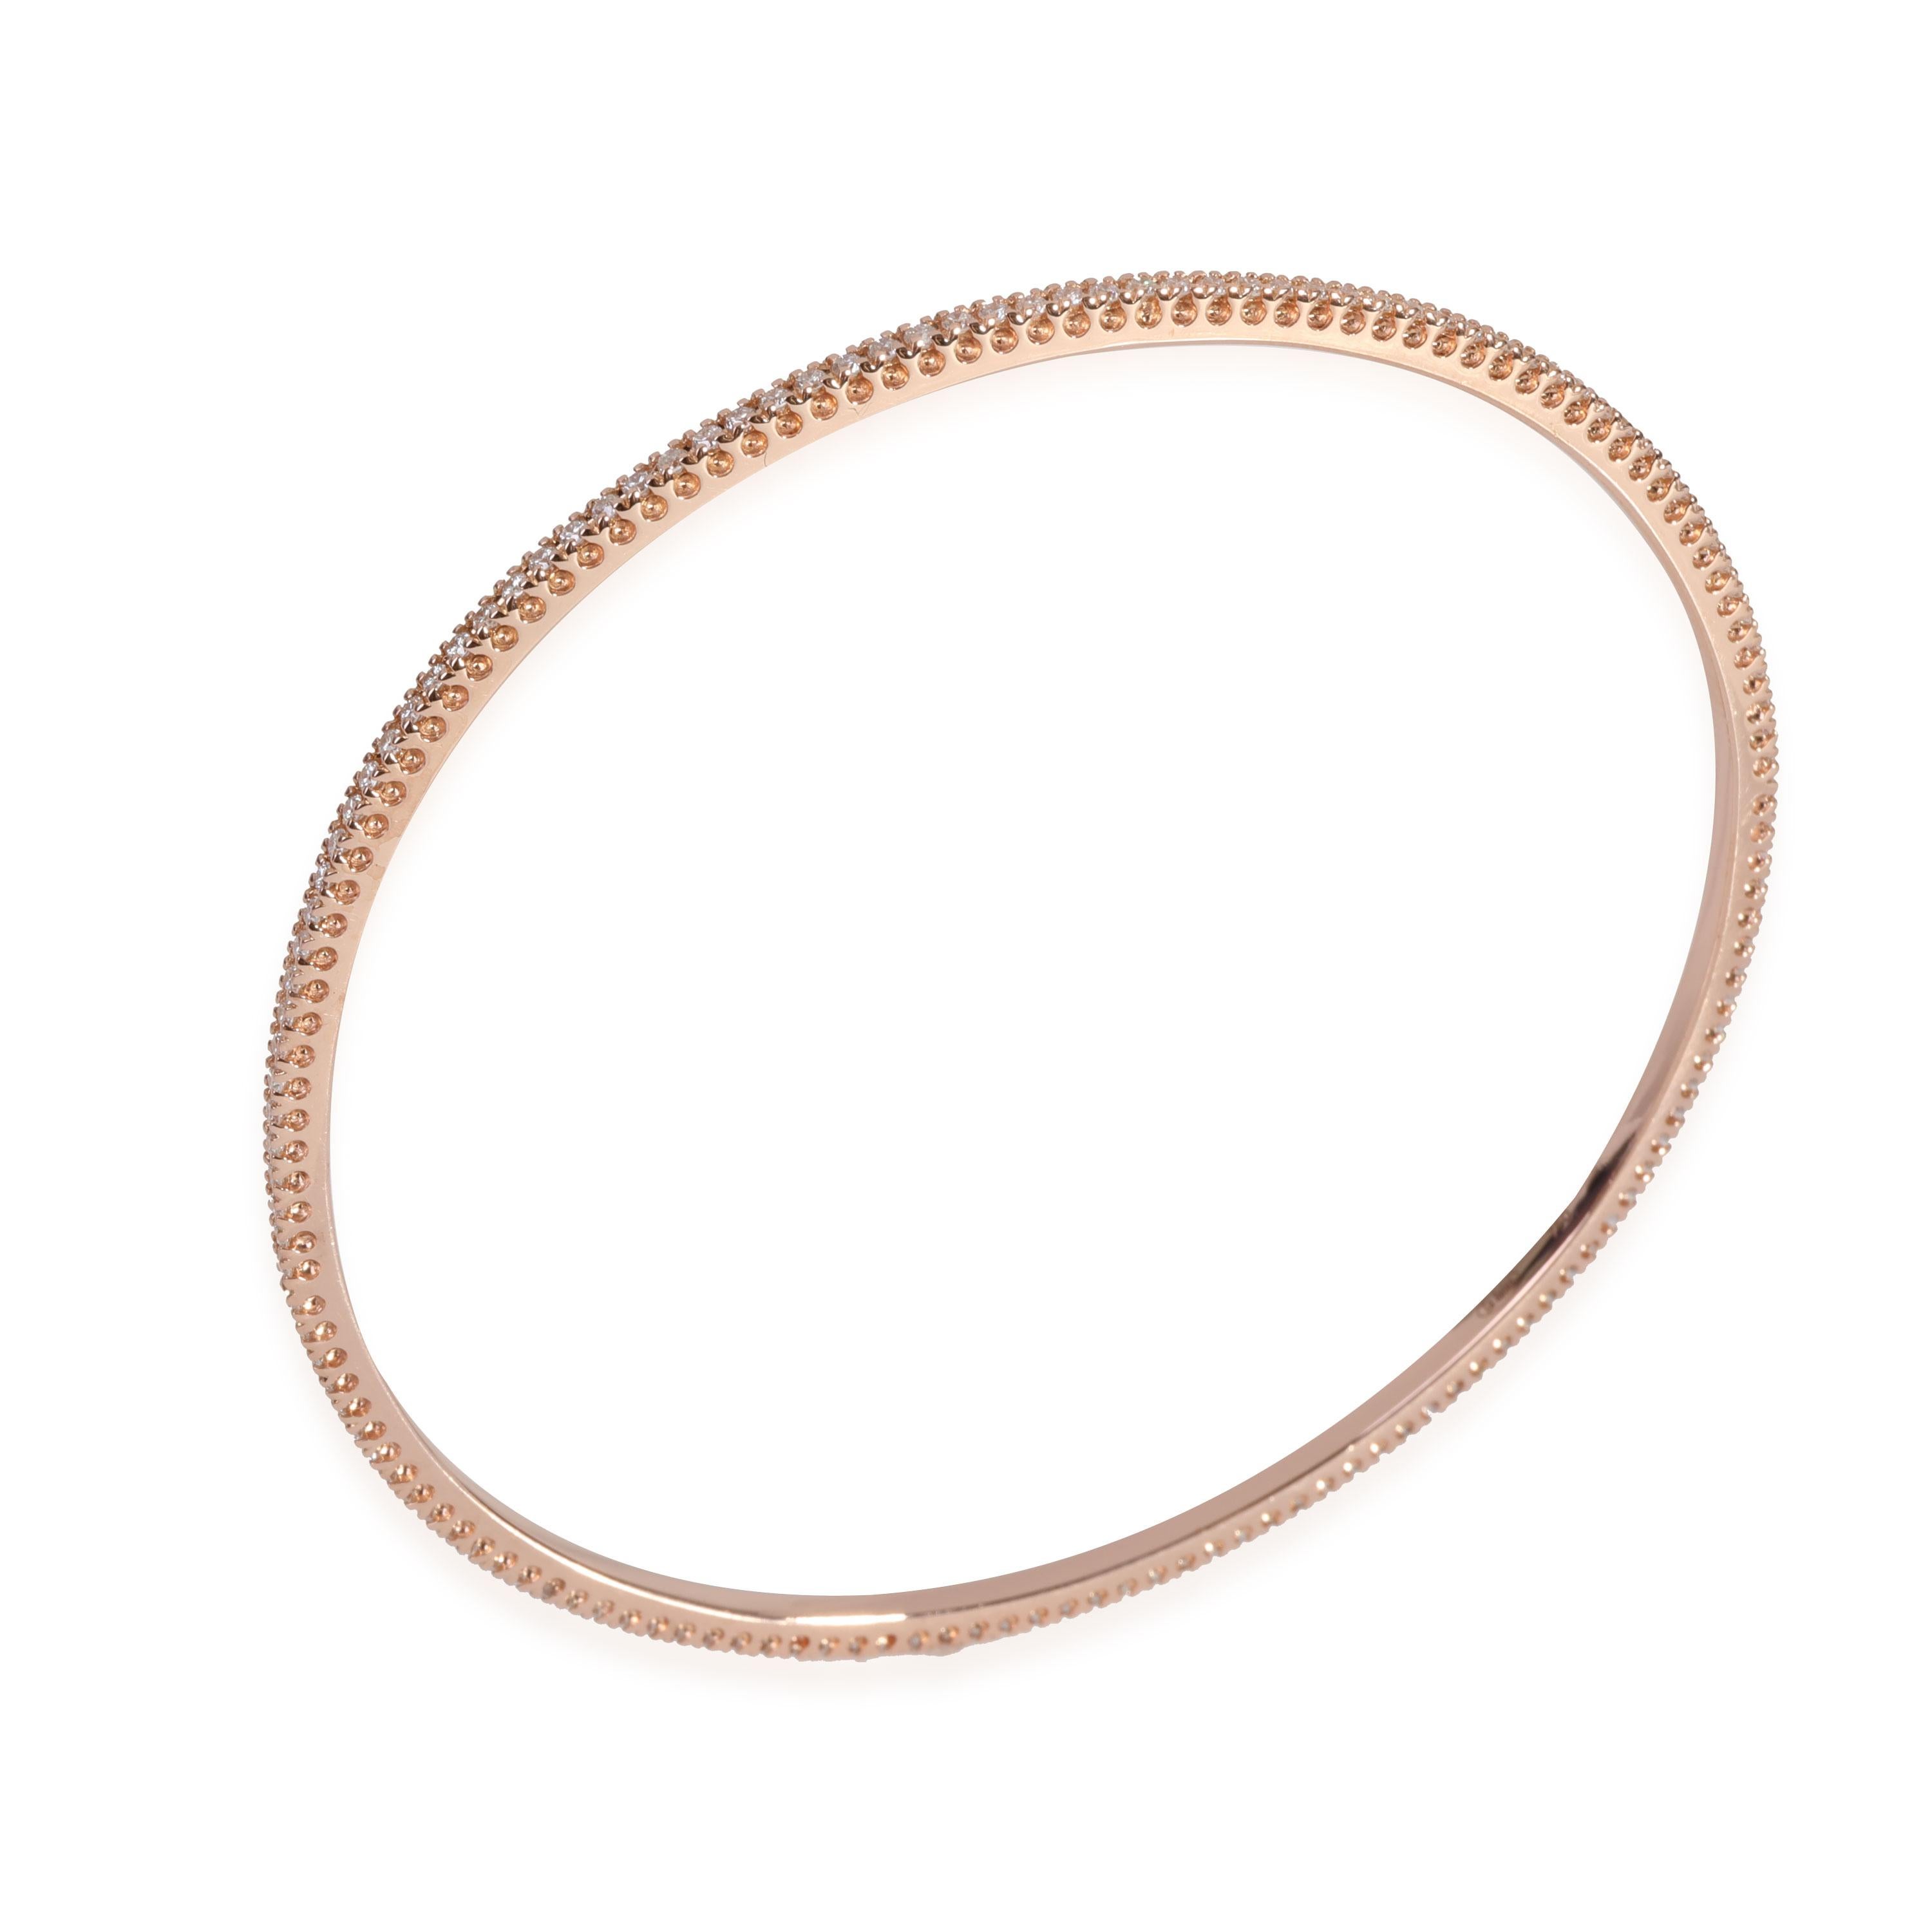 La Reina Diamond Bangle in 18k Rose Gold 1 CTW

PRIMARY DETAILS
SKU: 118055
Listing Title: La Reina Diamond Bangle in 18k Rose Gold 1 CTW
Condition Description: Retails for 3500 USD. In excellent condition and recently polished. Fits a 7.75 inch